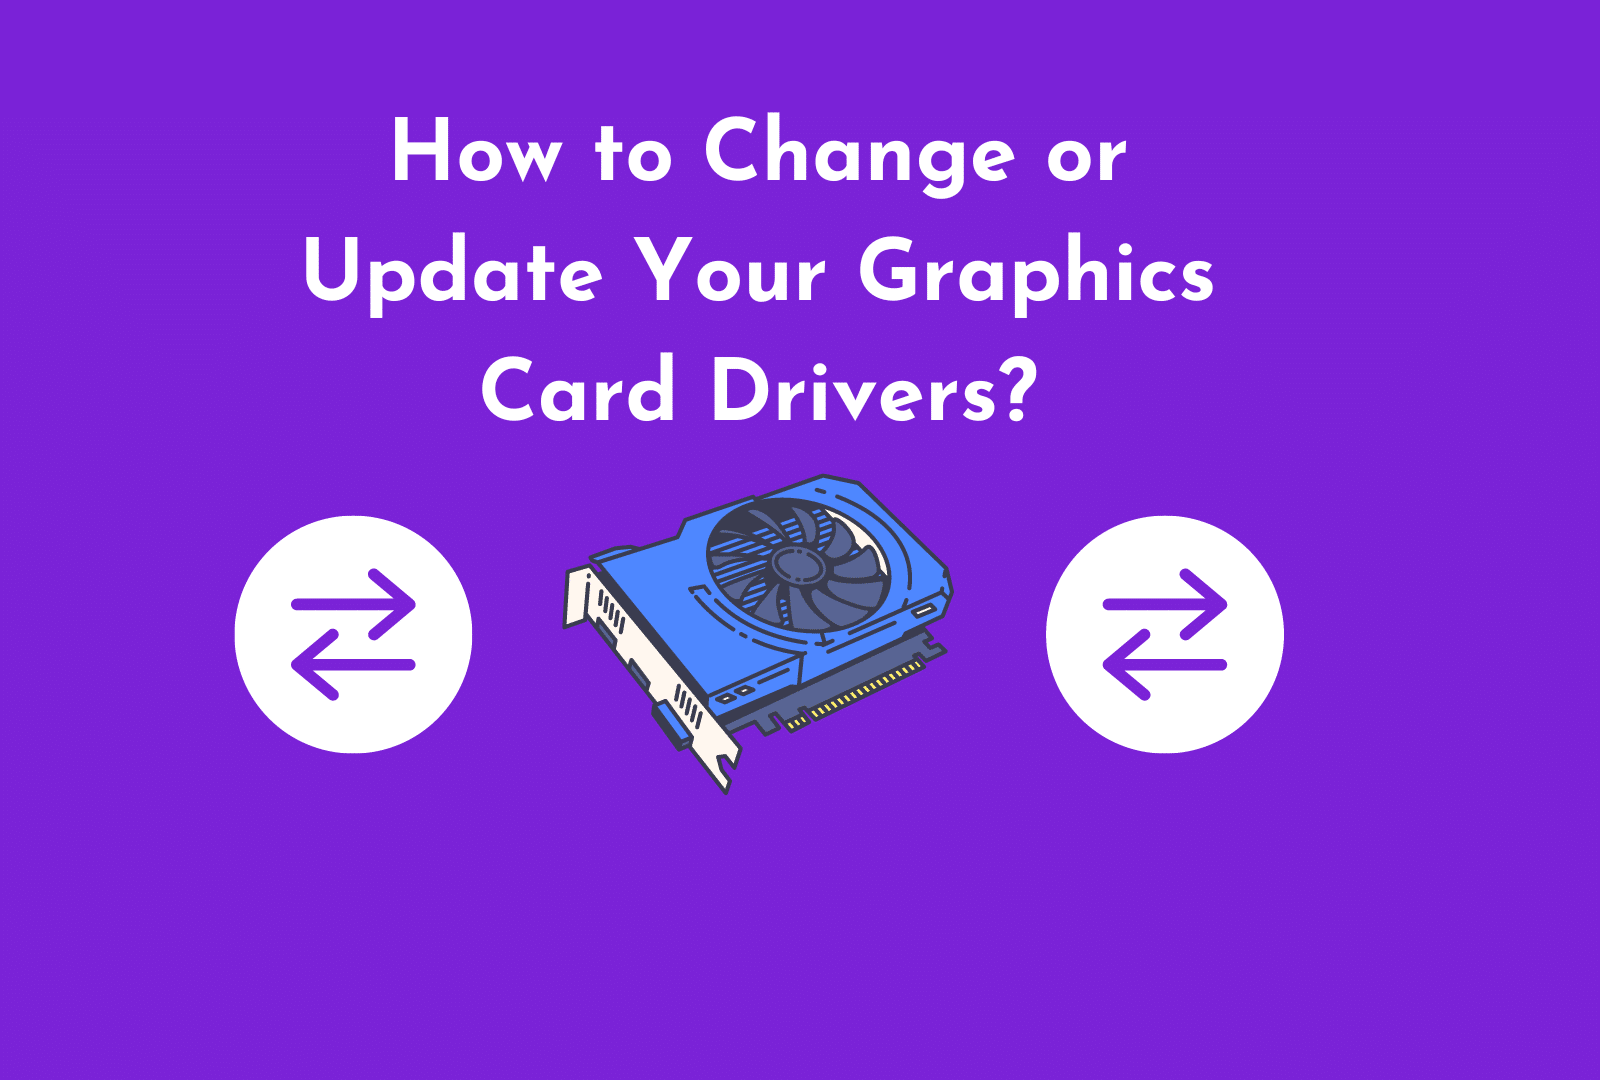 C:\Users\Mohsin\Downloads\How to Change or Update Your Graphics Card Drivers.png